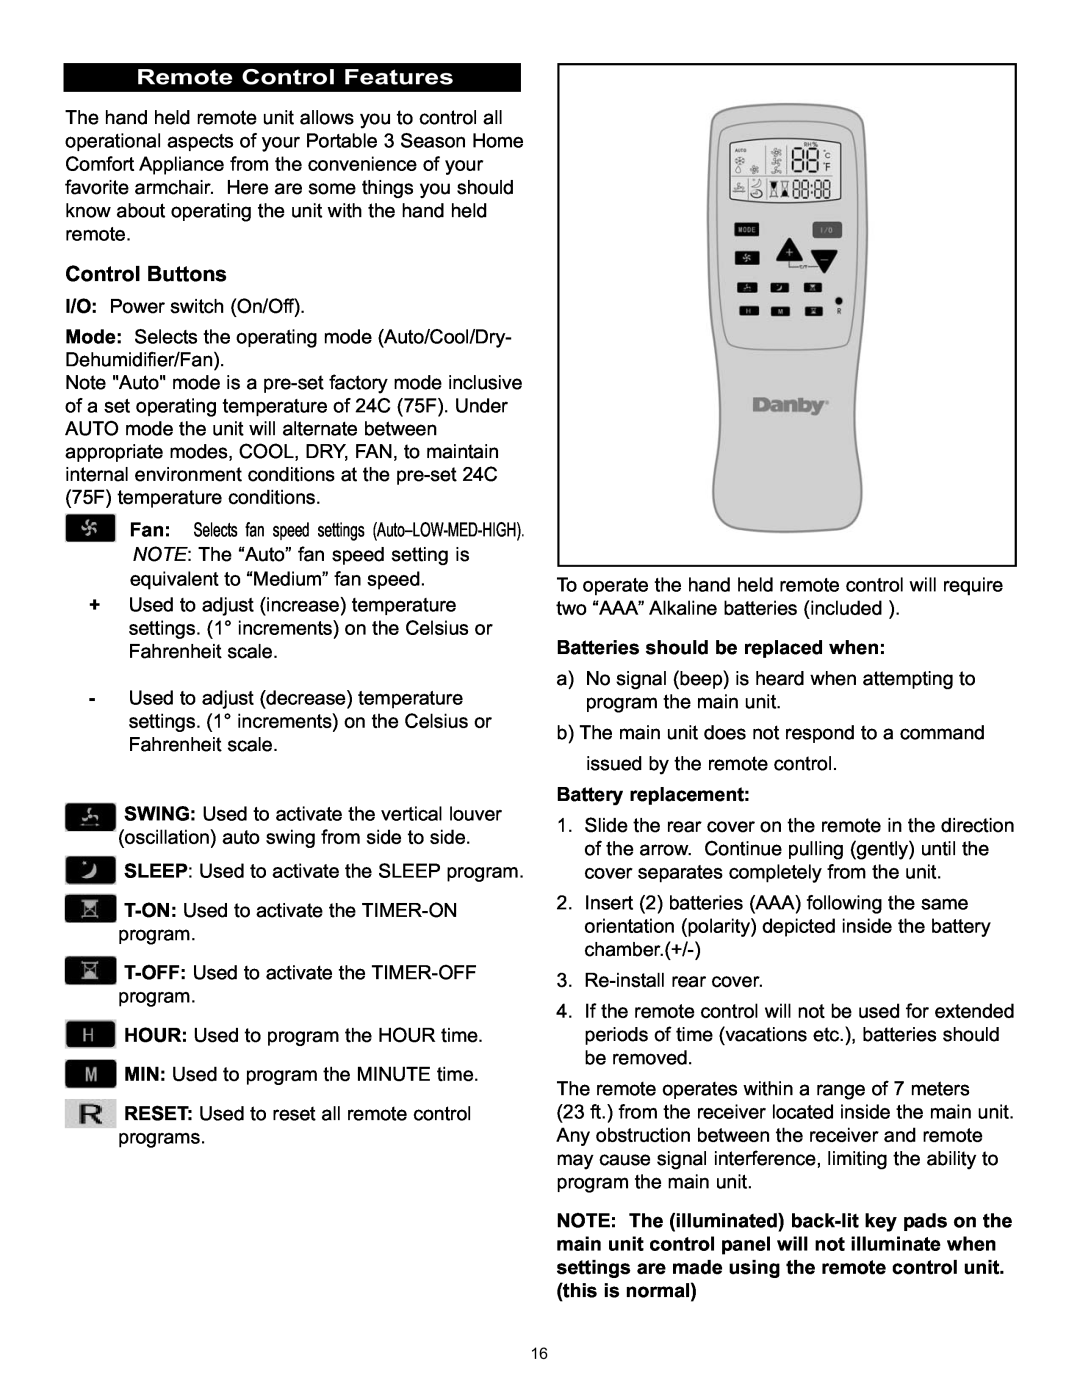 Danby DPAC120061 Remote Control Features, Control Buttons, Batteries should be replaced when, Battery replacement 